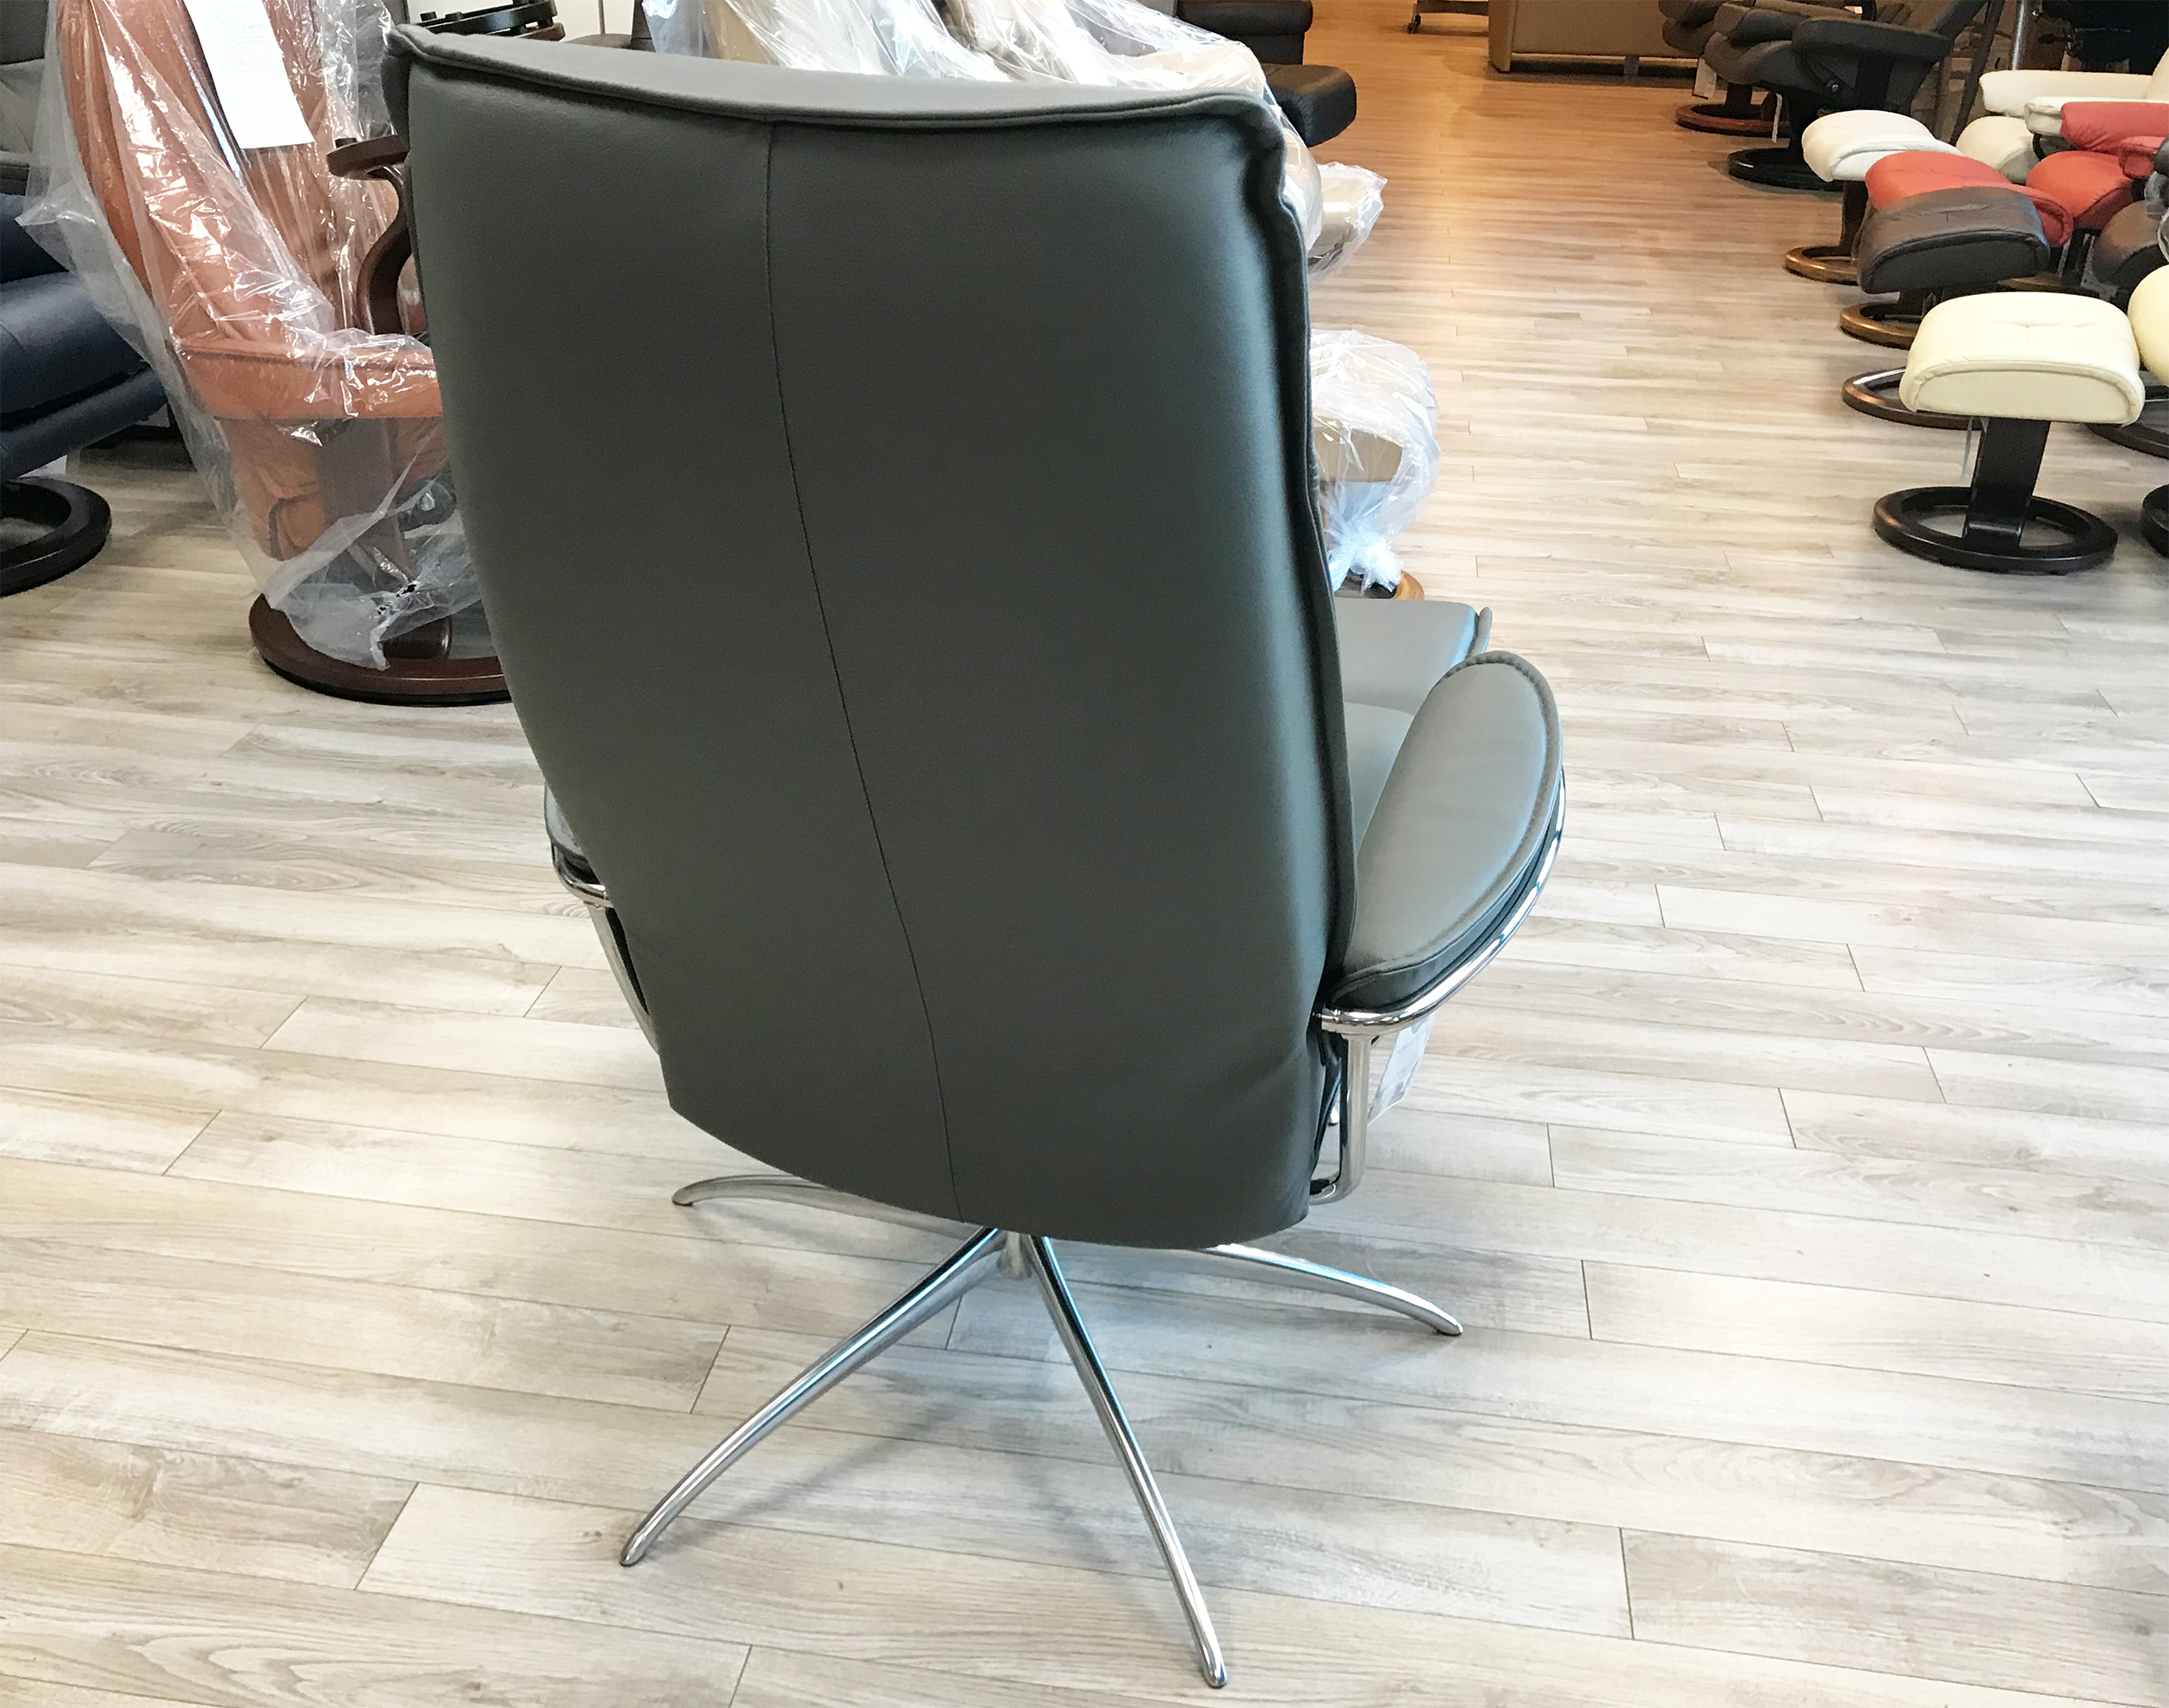 Stressless City - Batick Back Leather Chairs City Stressless High Recliners High Grey Ekornes by Back Batick Grey Leather